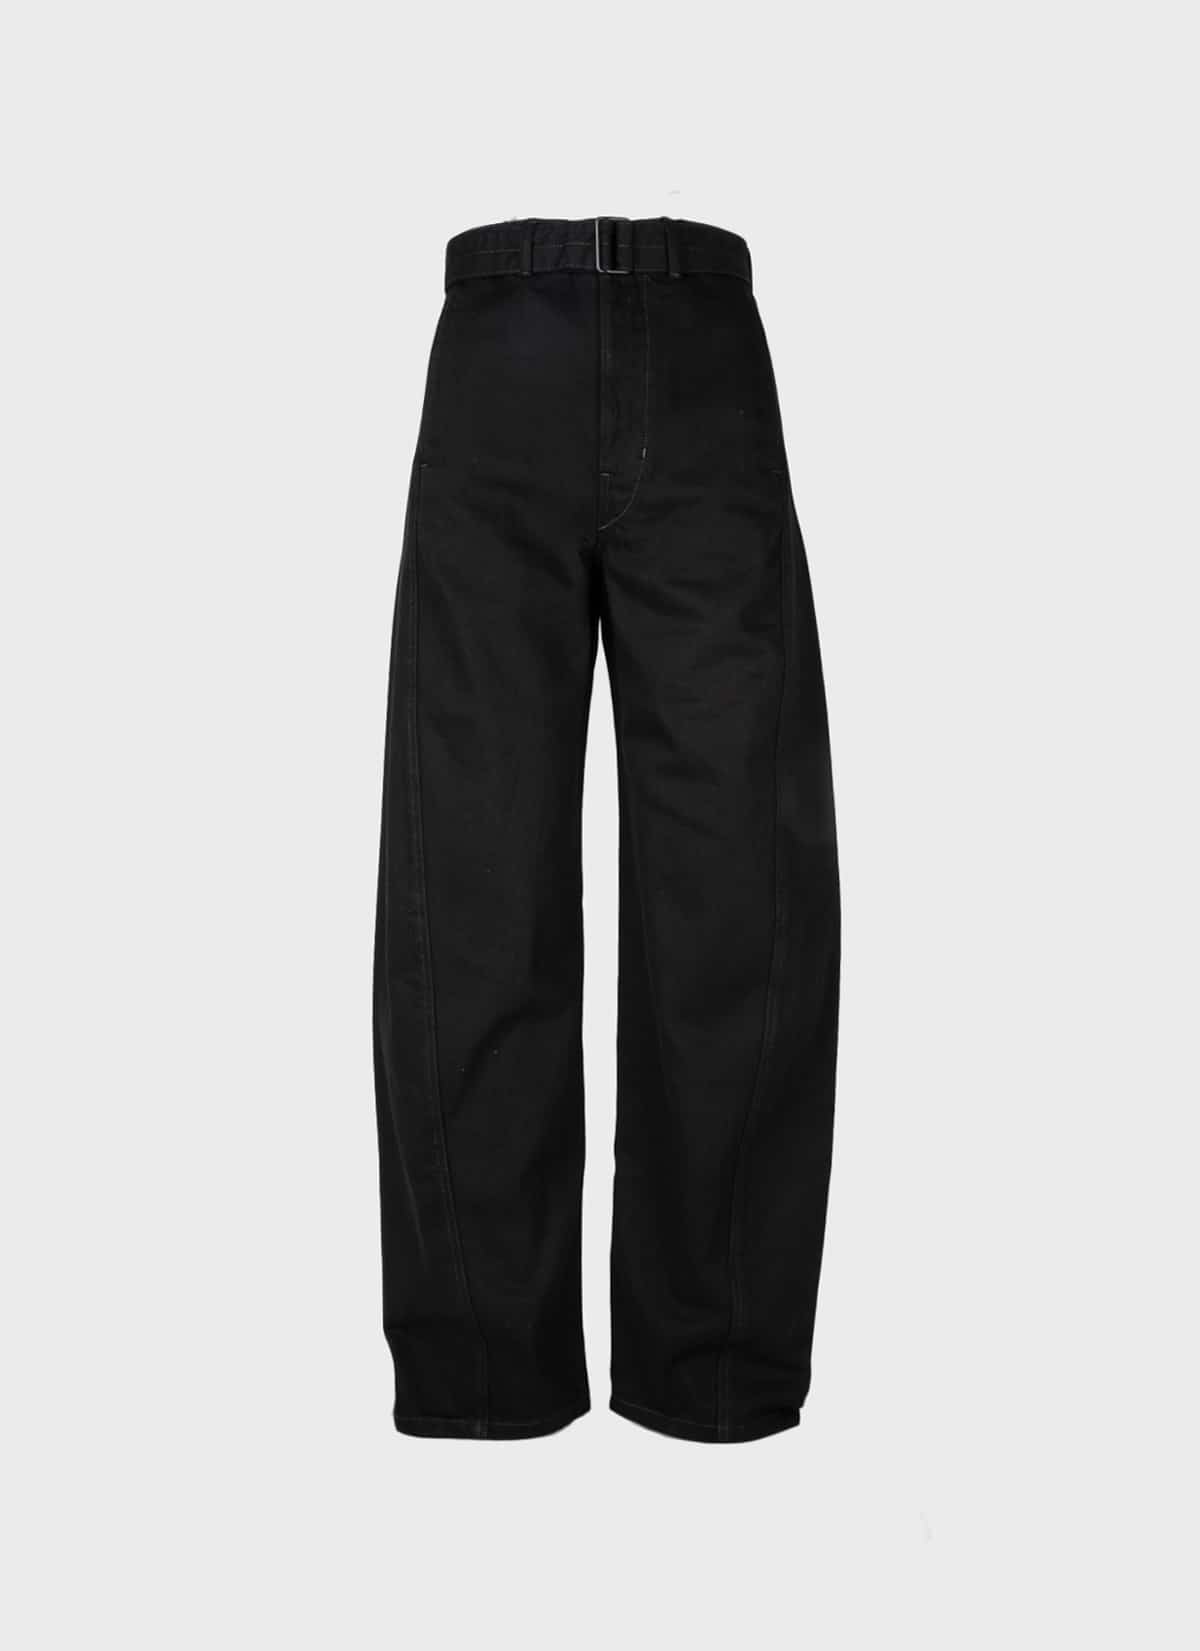 Lemaire Unisex Twisted Belted Pants